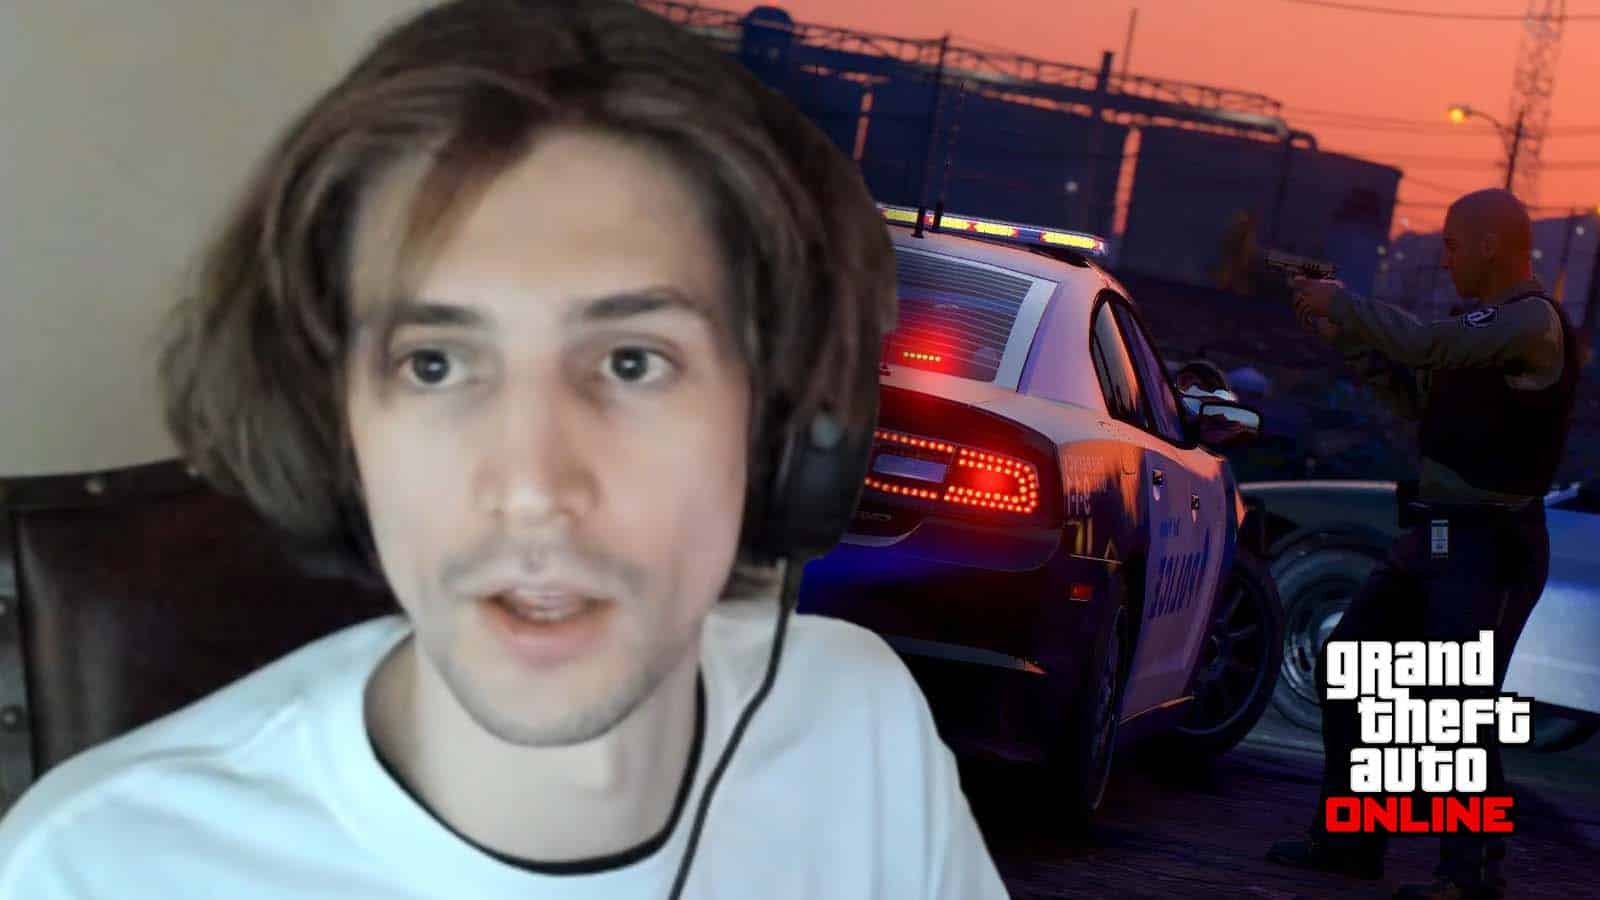 xQc gets roasted over his 'lack of roleplaying' by NoPixel owner after GTA RP run-in